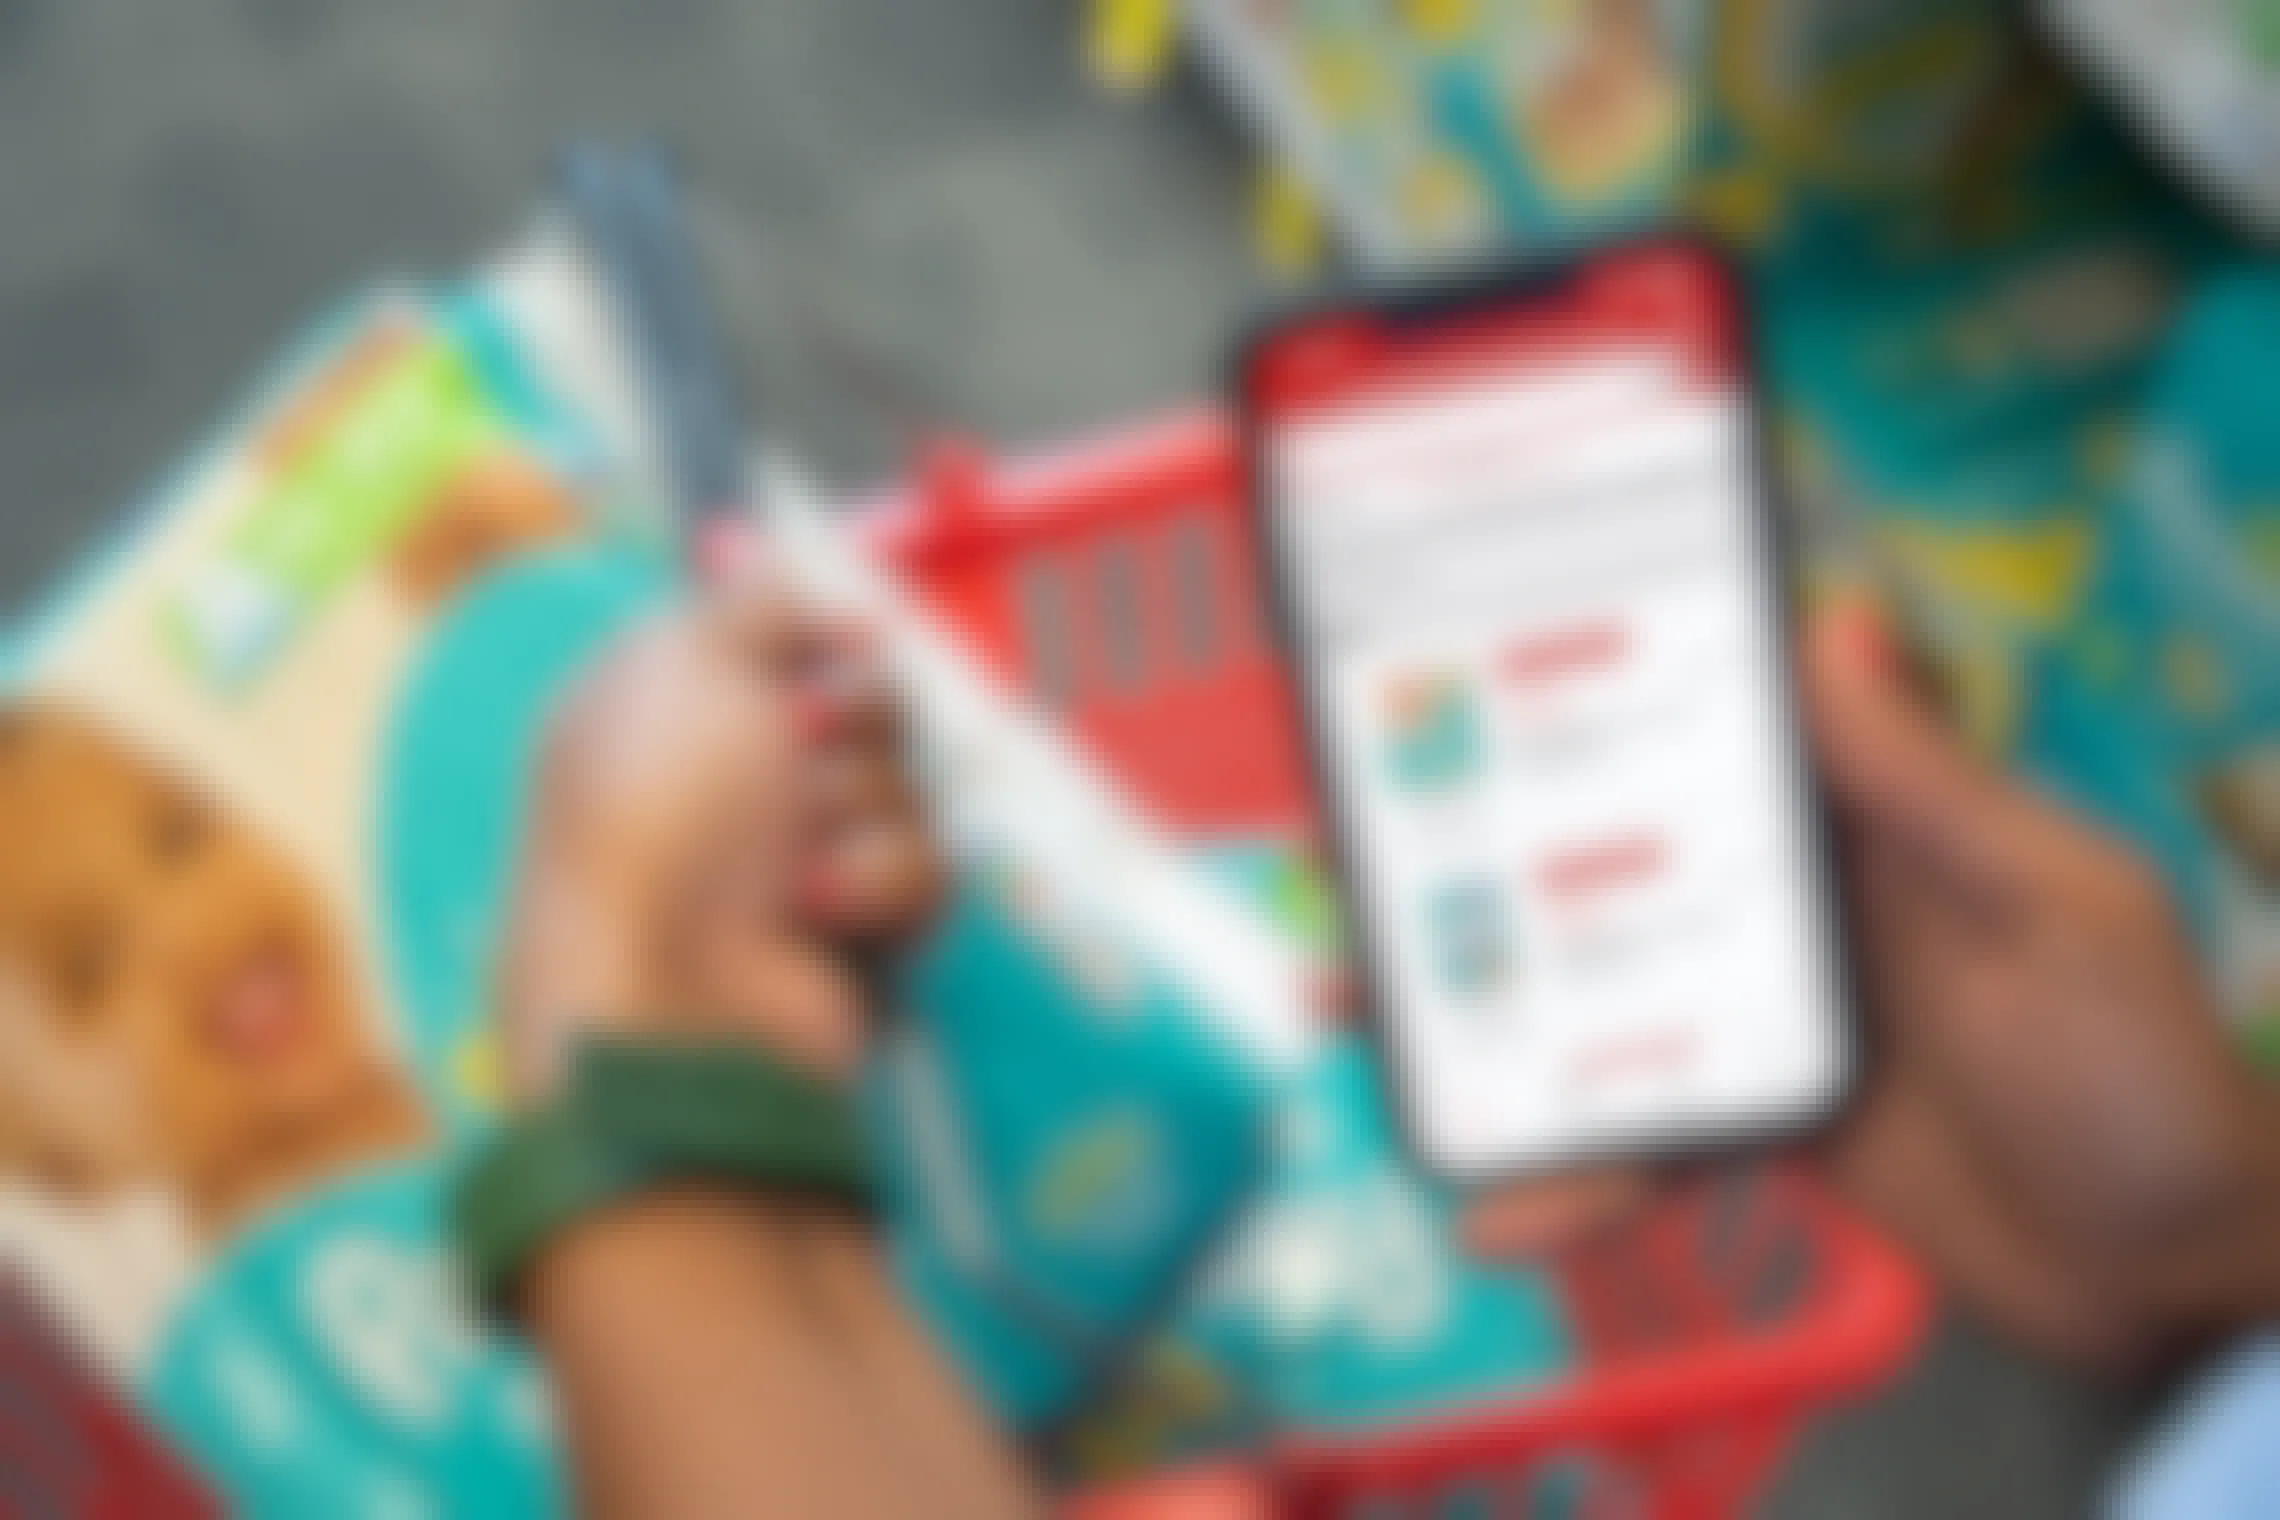 Pampers coupons on the CVS app with a basket holding two packs of pampers diapers.